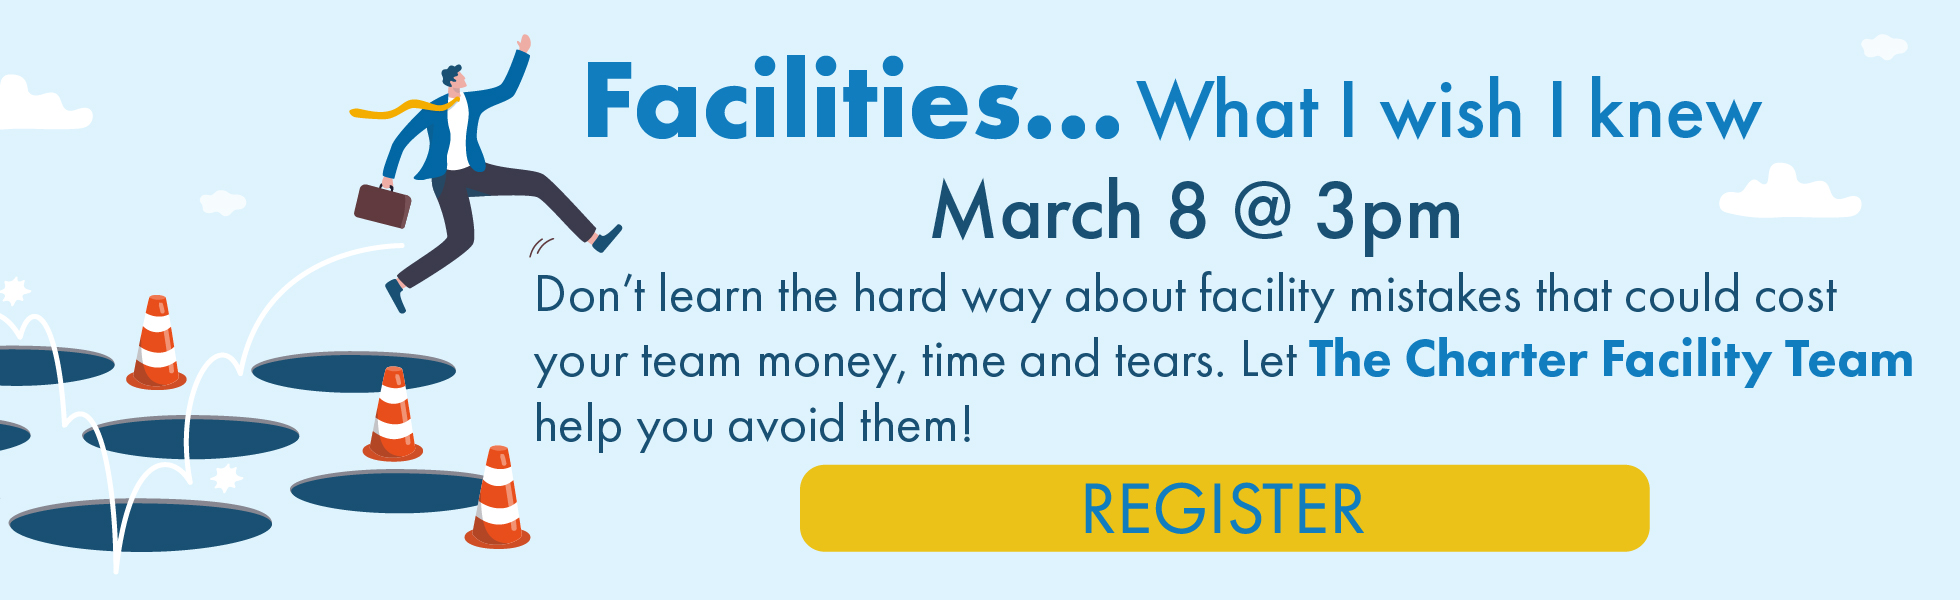 Illustration of a man in a business suit successfully jumping over potholes. To the right, text: Facilities...What I wish I knew. March 8 @ 3pm. Don’t learn the hard way about facility mistakes that could cost your team money, time and tears. Let The Charter Facility Team help you avoid them! Click the image to register.